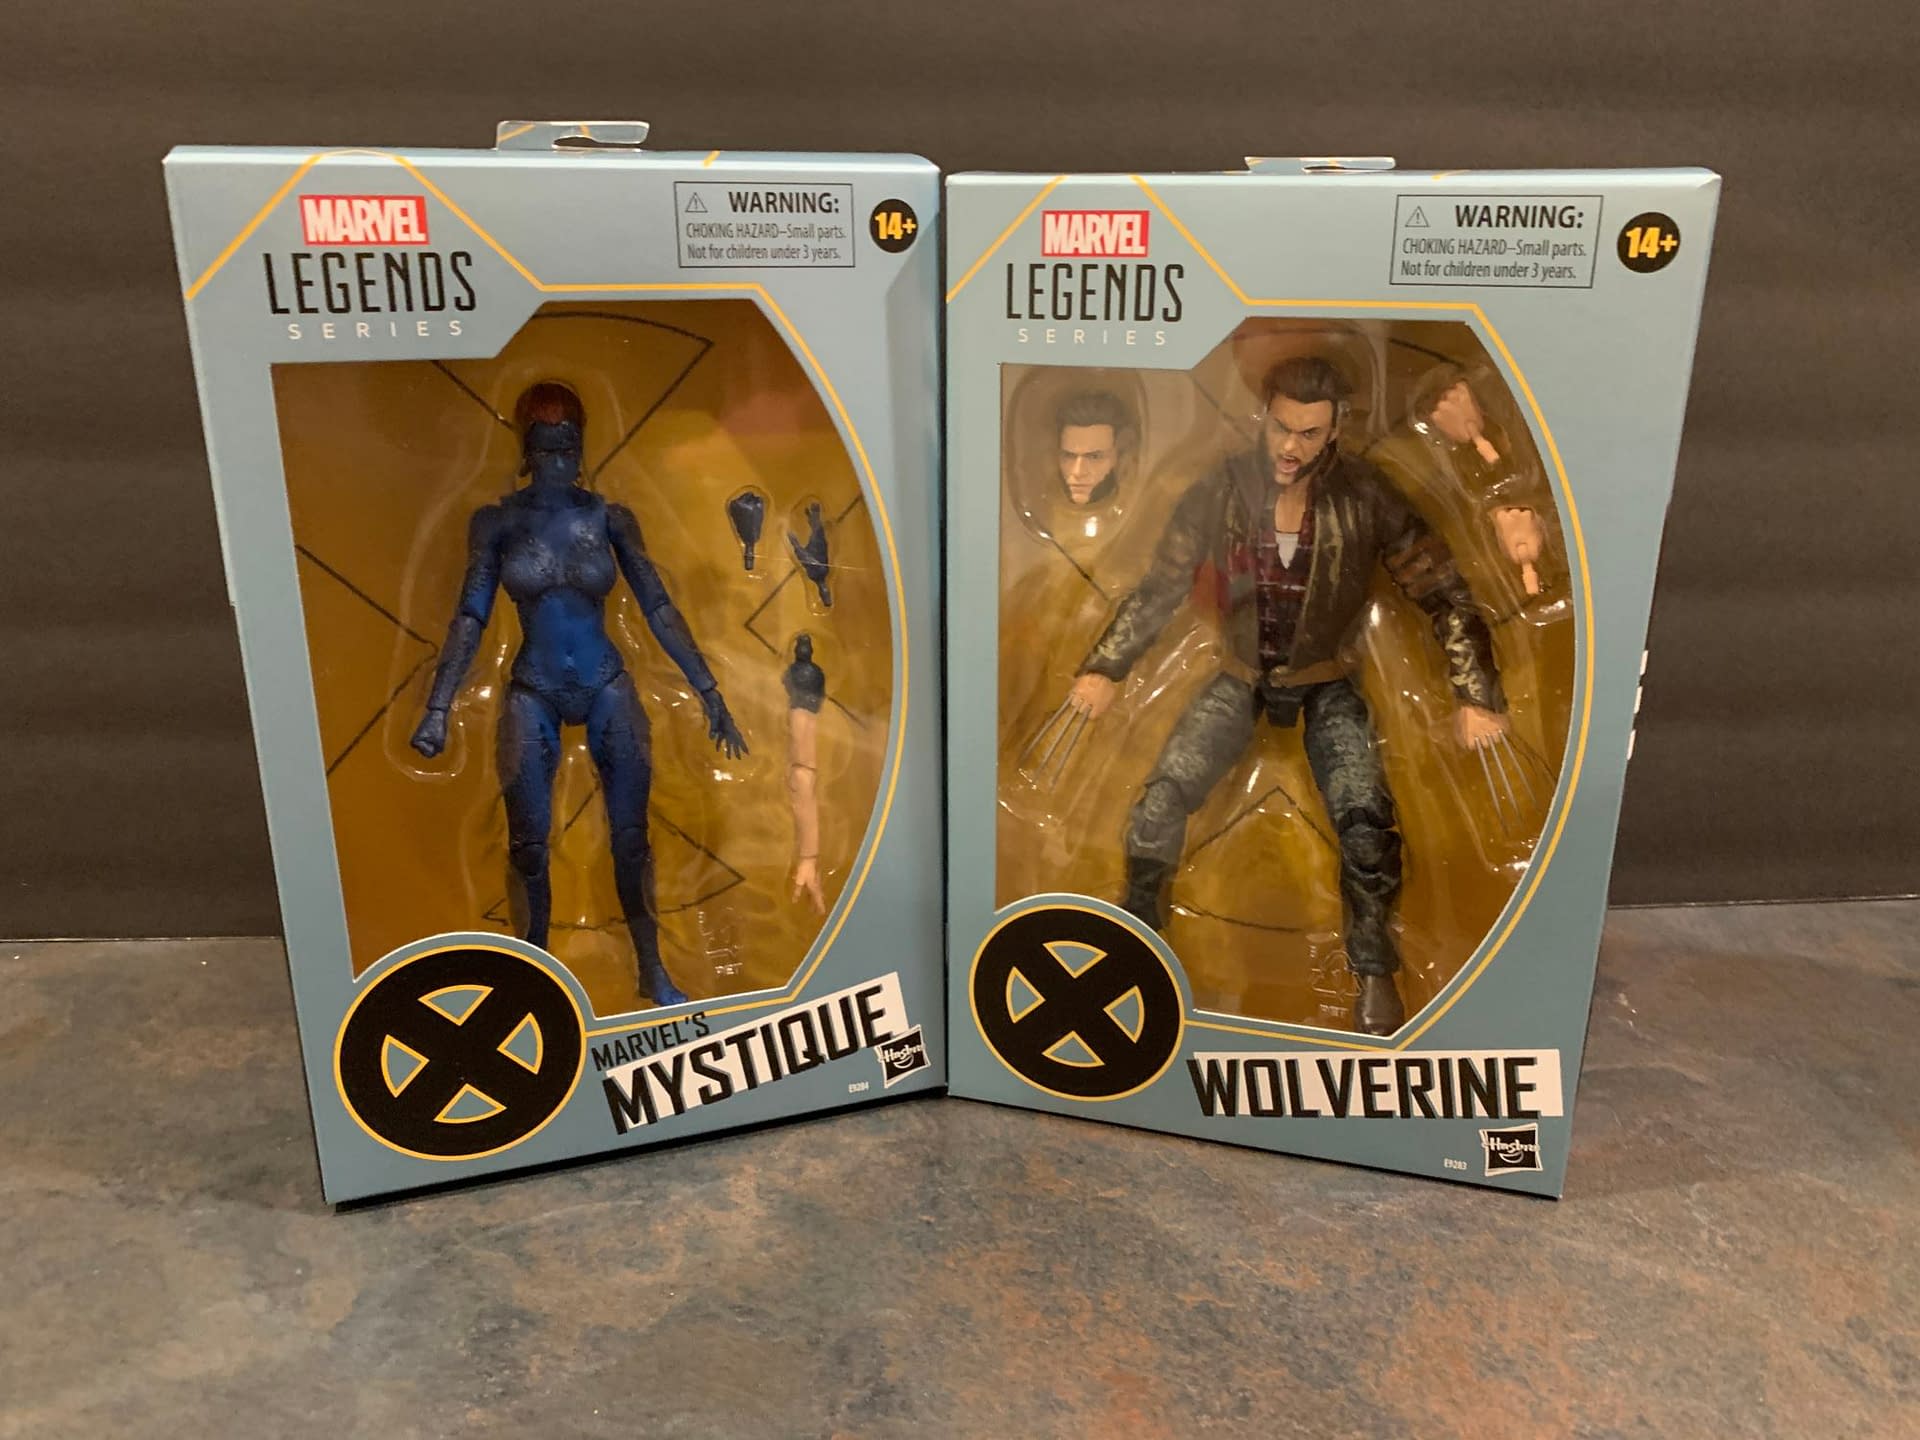 Let's Take A Look At Some New Hasbro Marvel Legends Figures